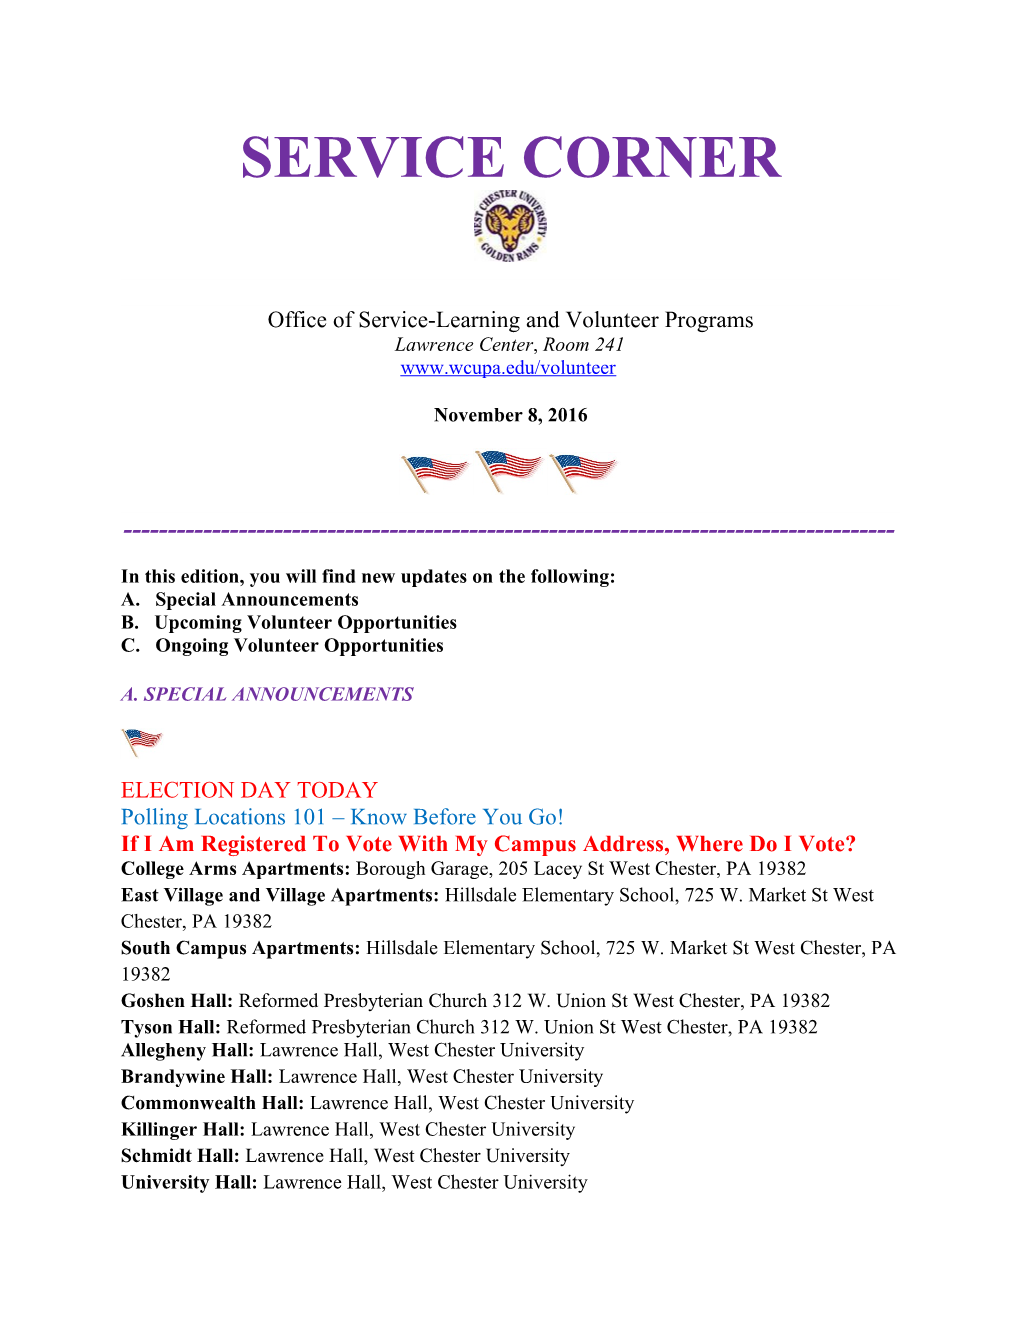 Office of Service-Learning and Volunteer Programs s2